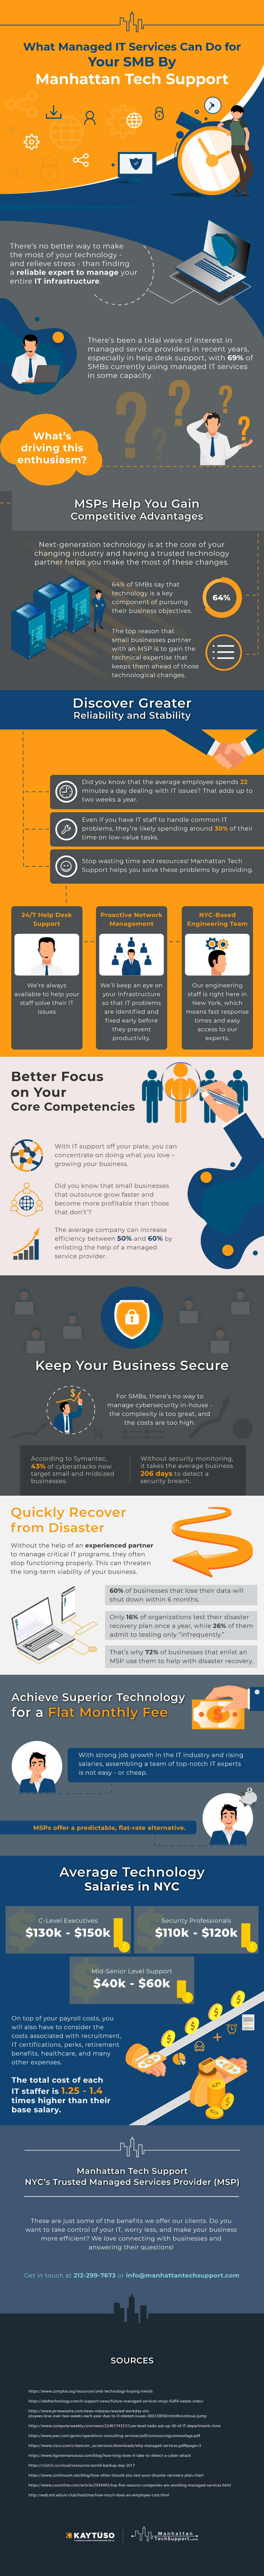 What Managed IT Services Can Do for Your SMB INFOGRAPHIC